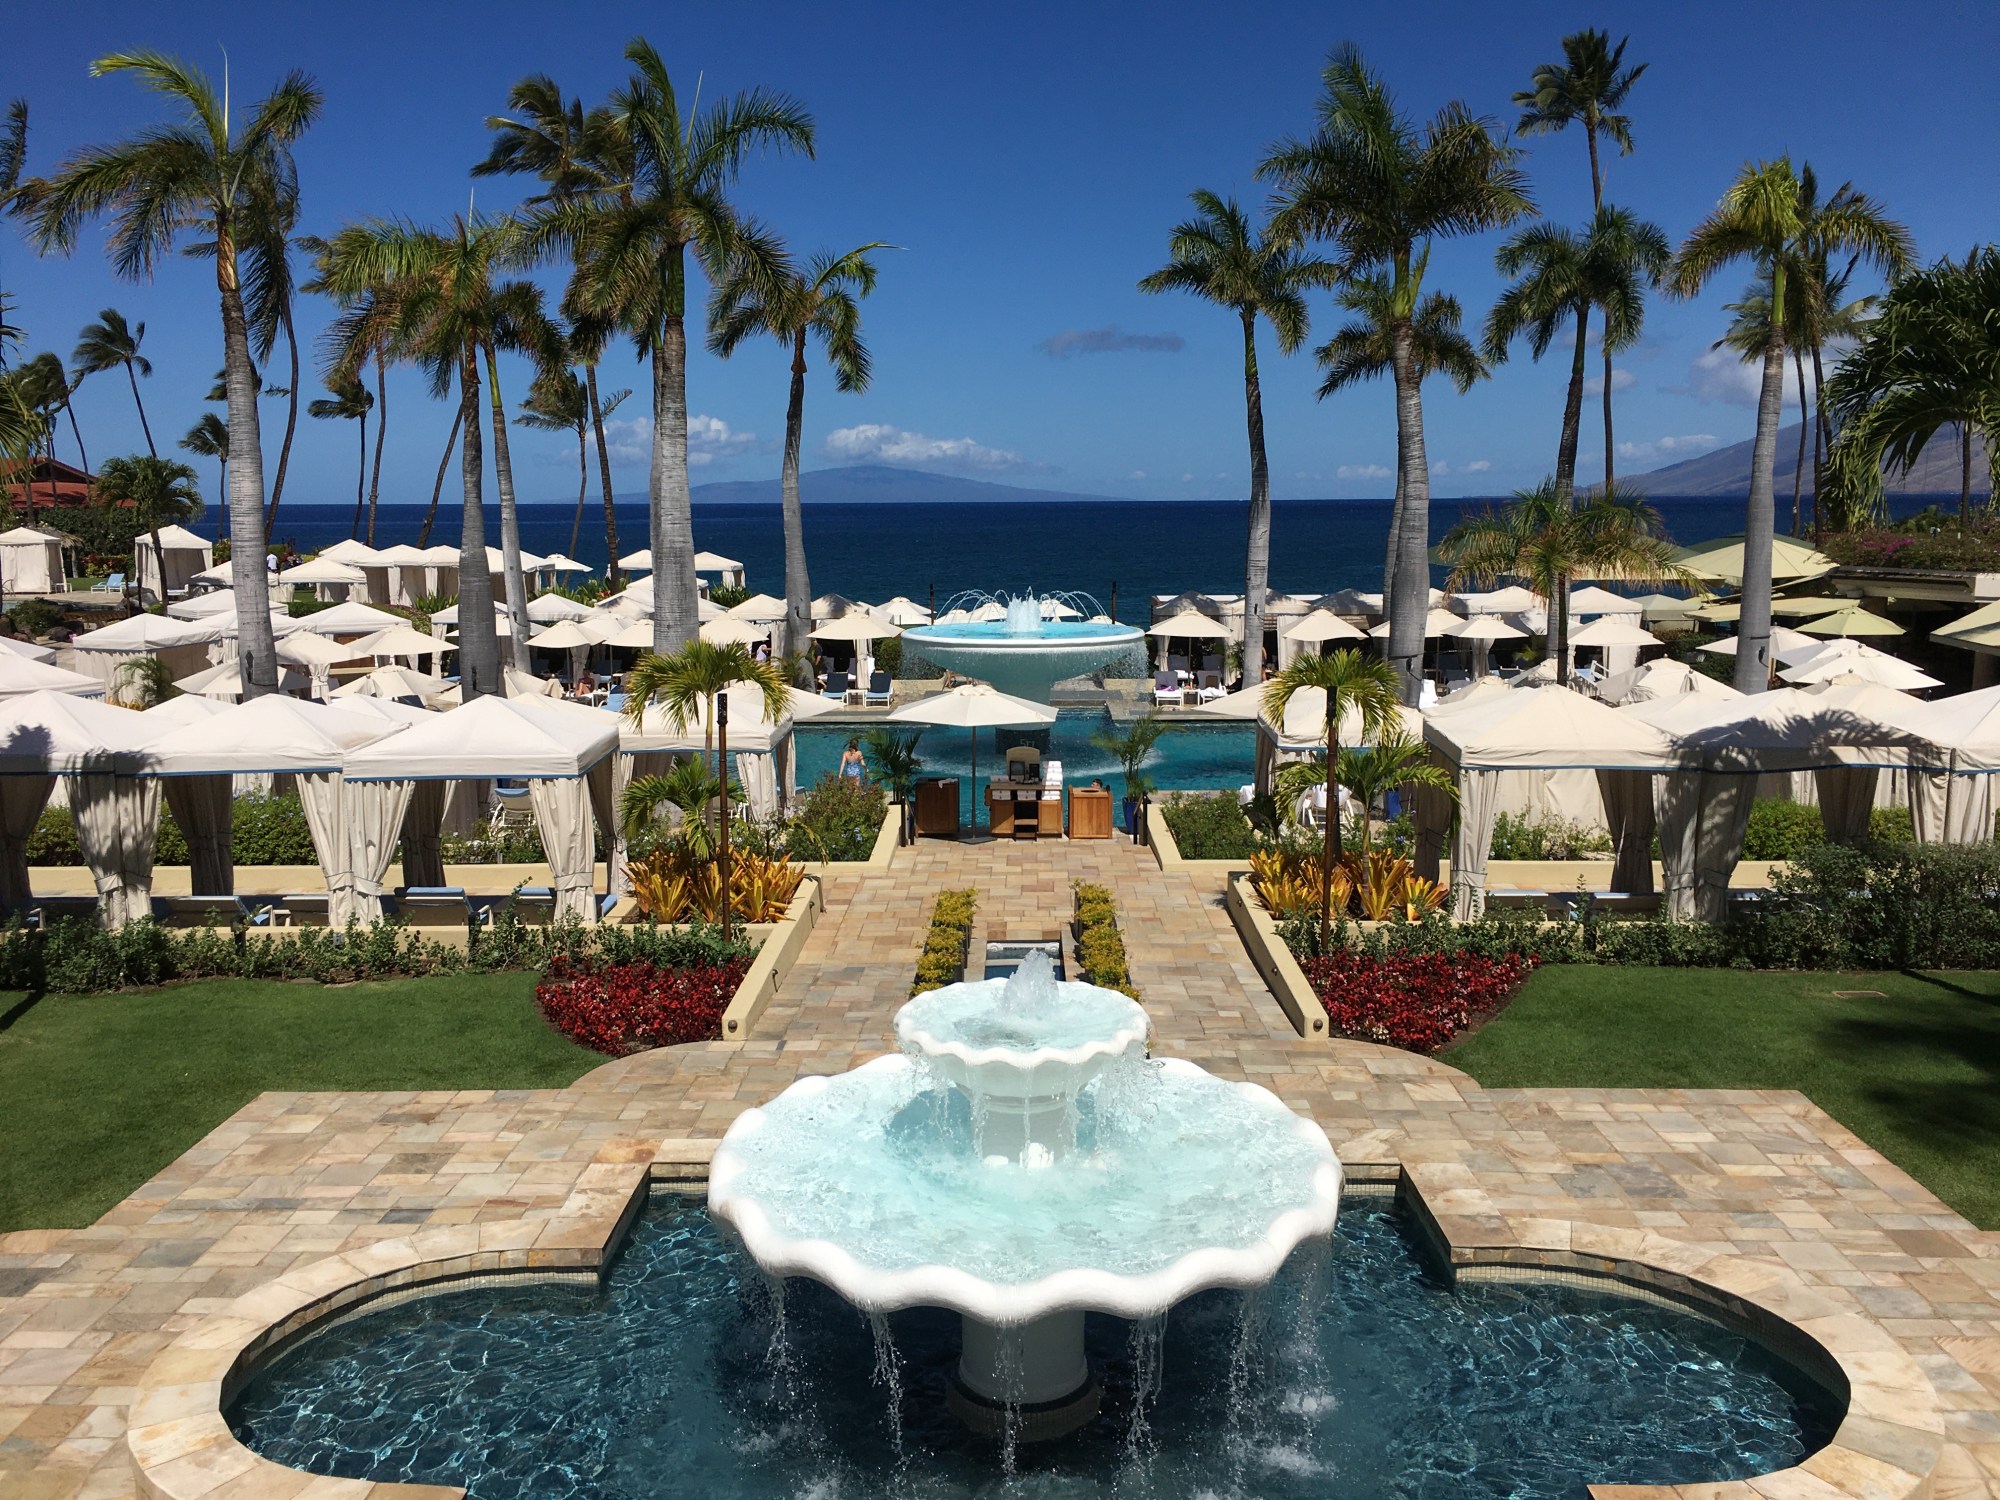 Why Hawaii Luxury Resorts Are So Expensive in 2021